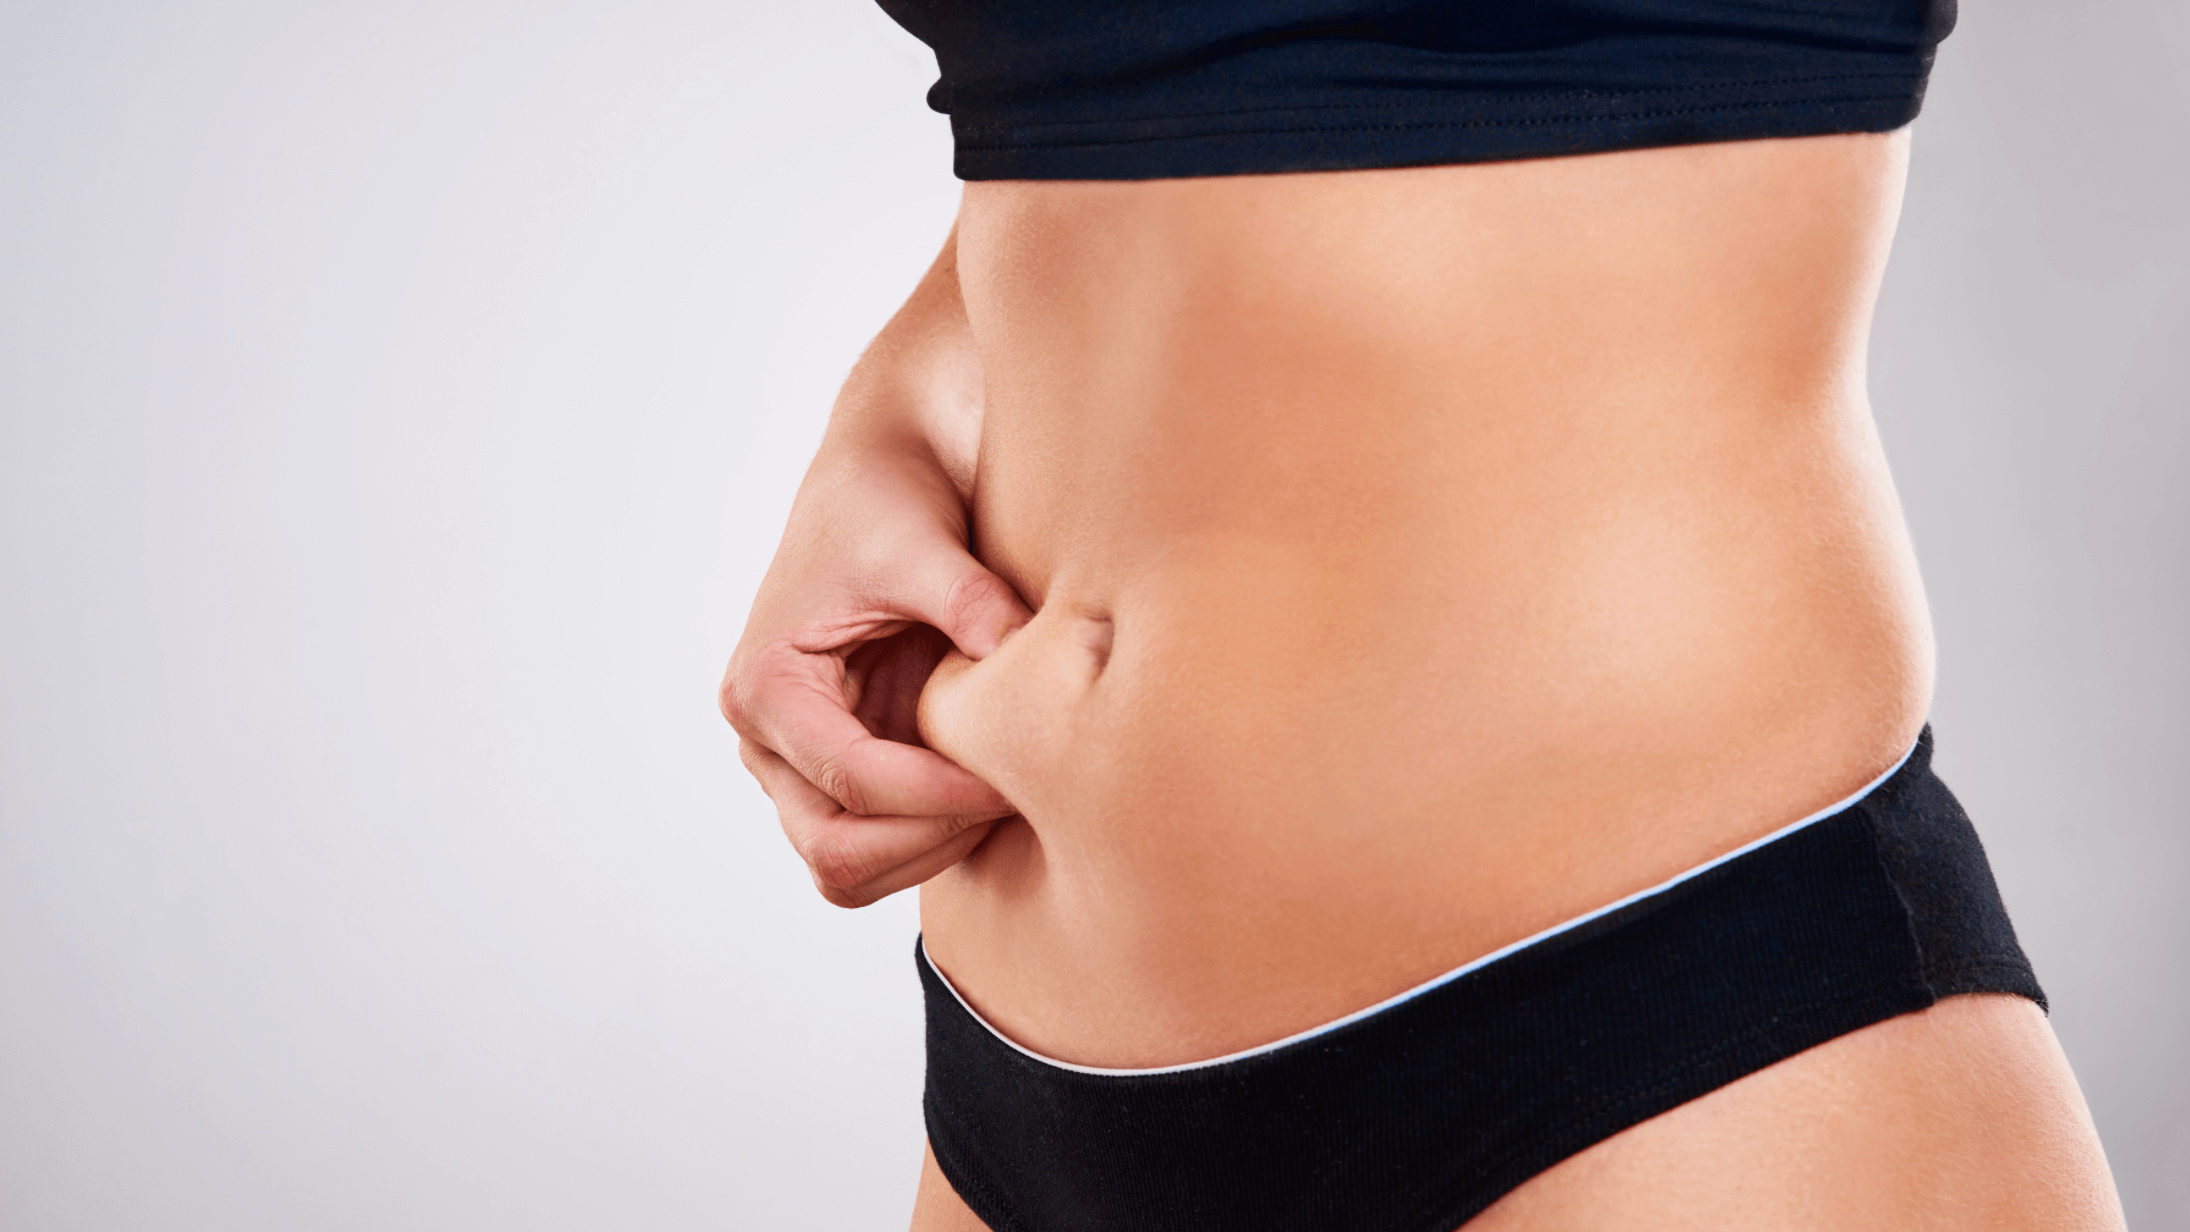 Will My Belly Button Change After Tummy Tuck Surgery?